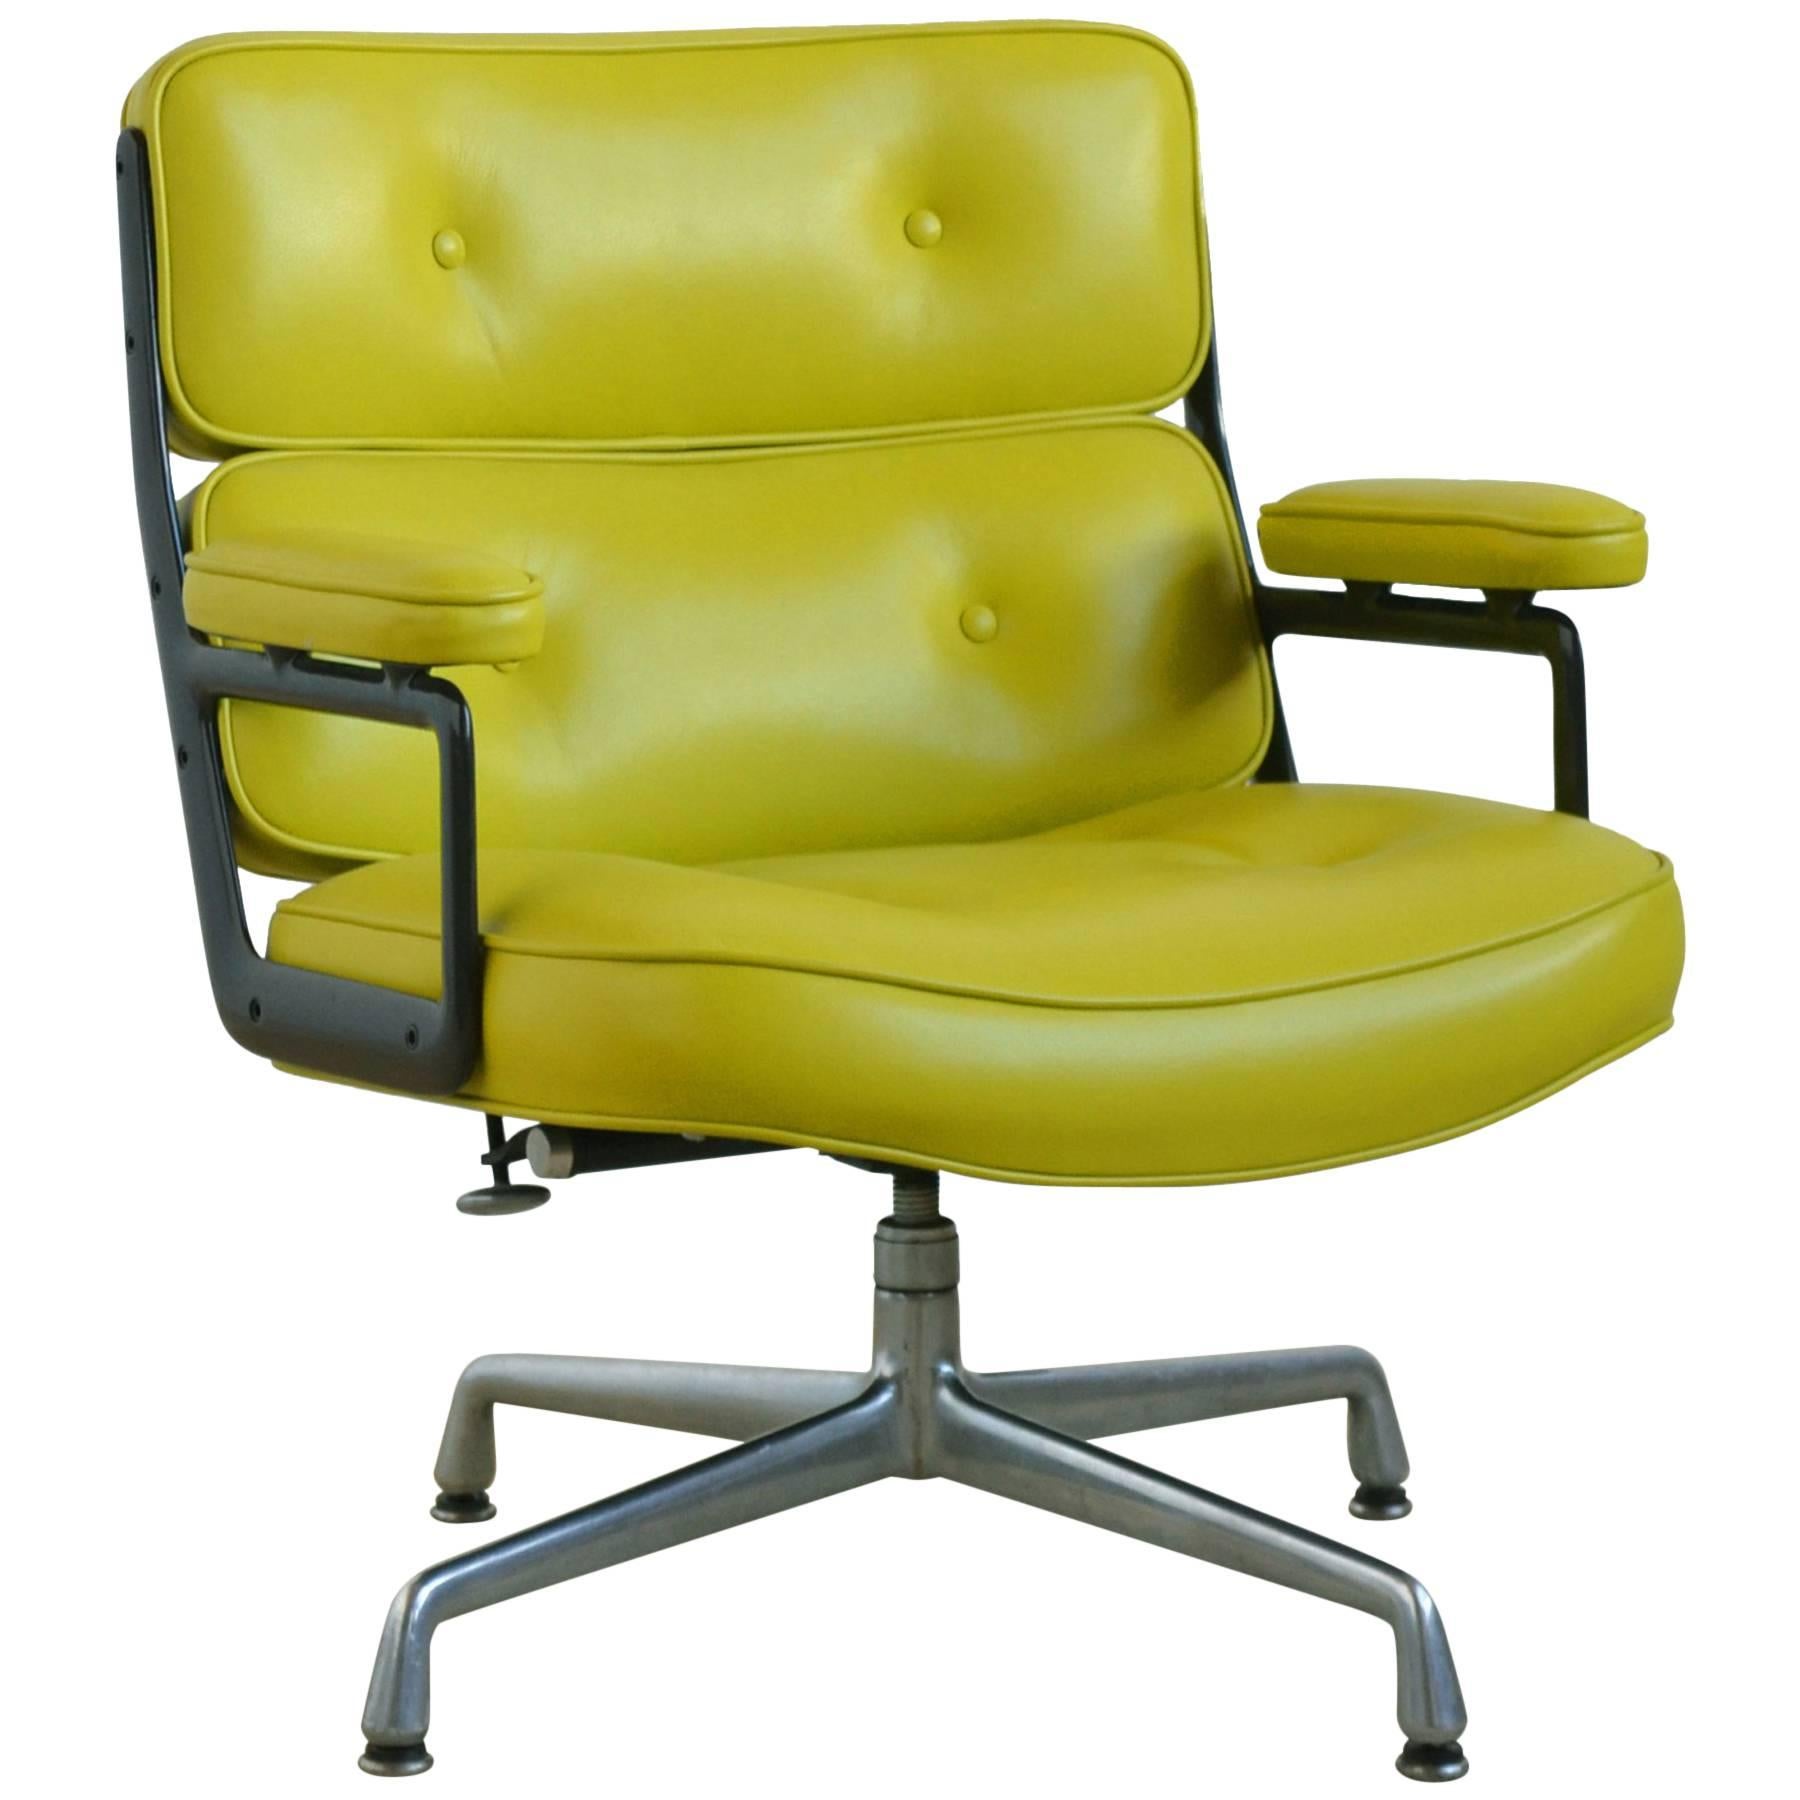 Eames Time-Life Chair with Green Leather by Herman Miller